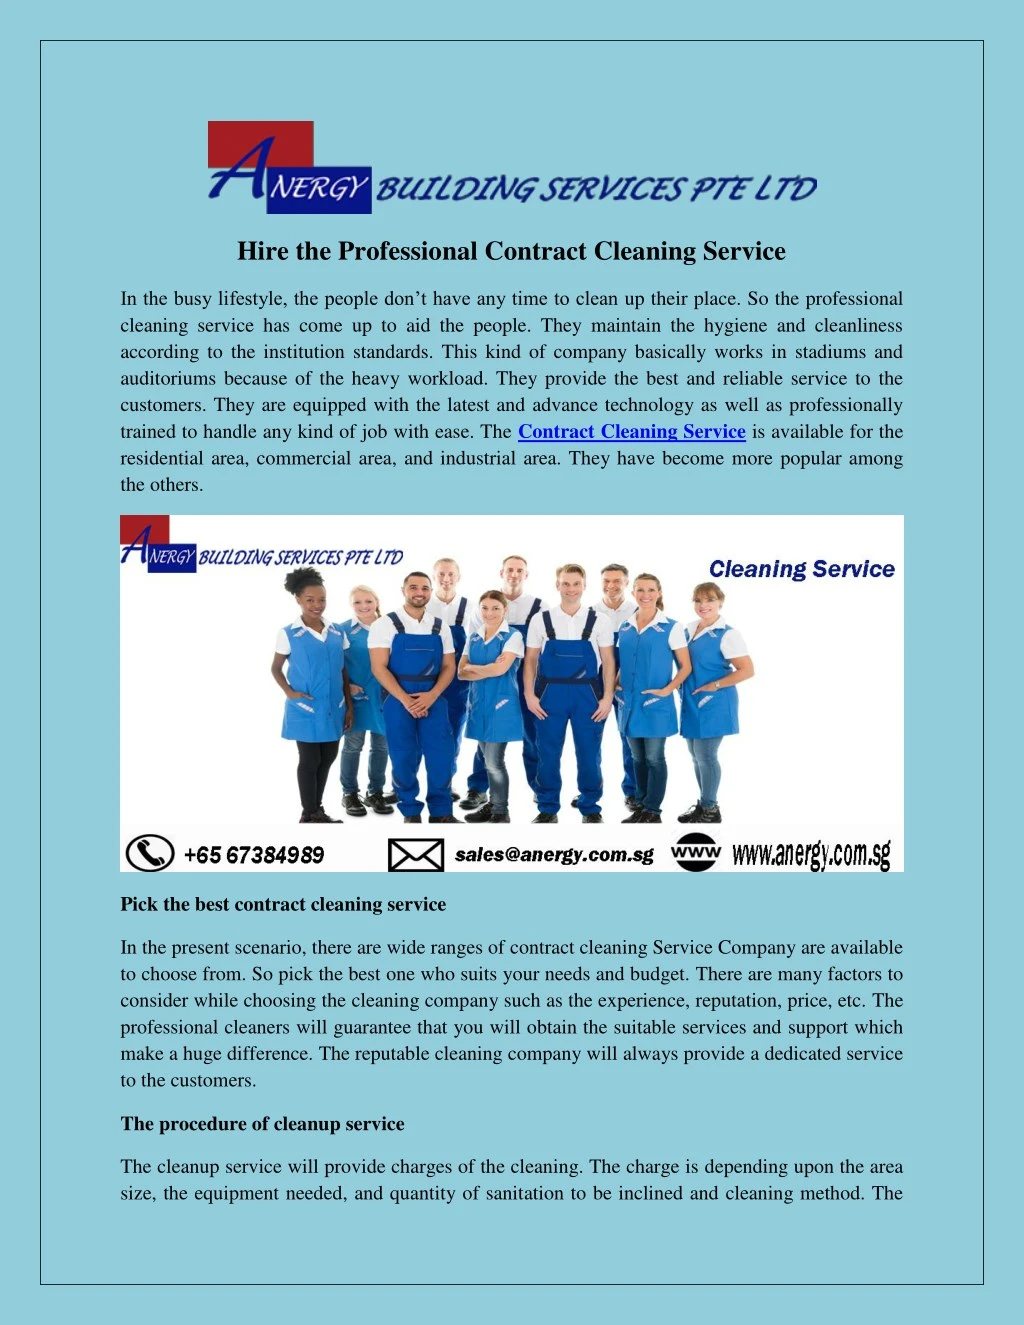 hire the professional contract cleaning service